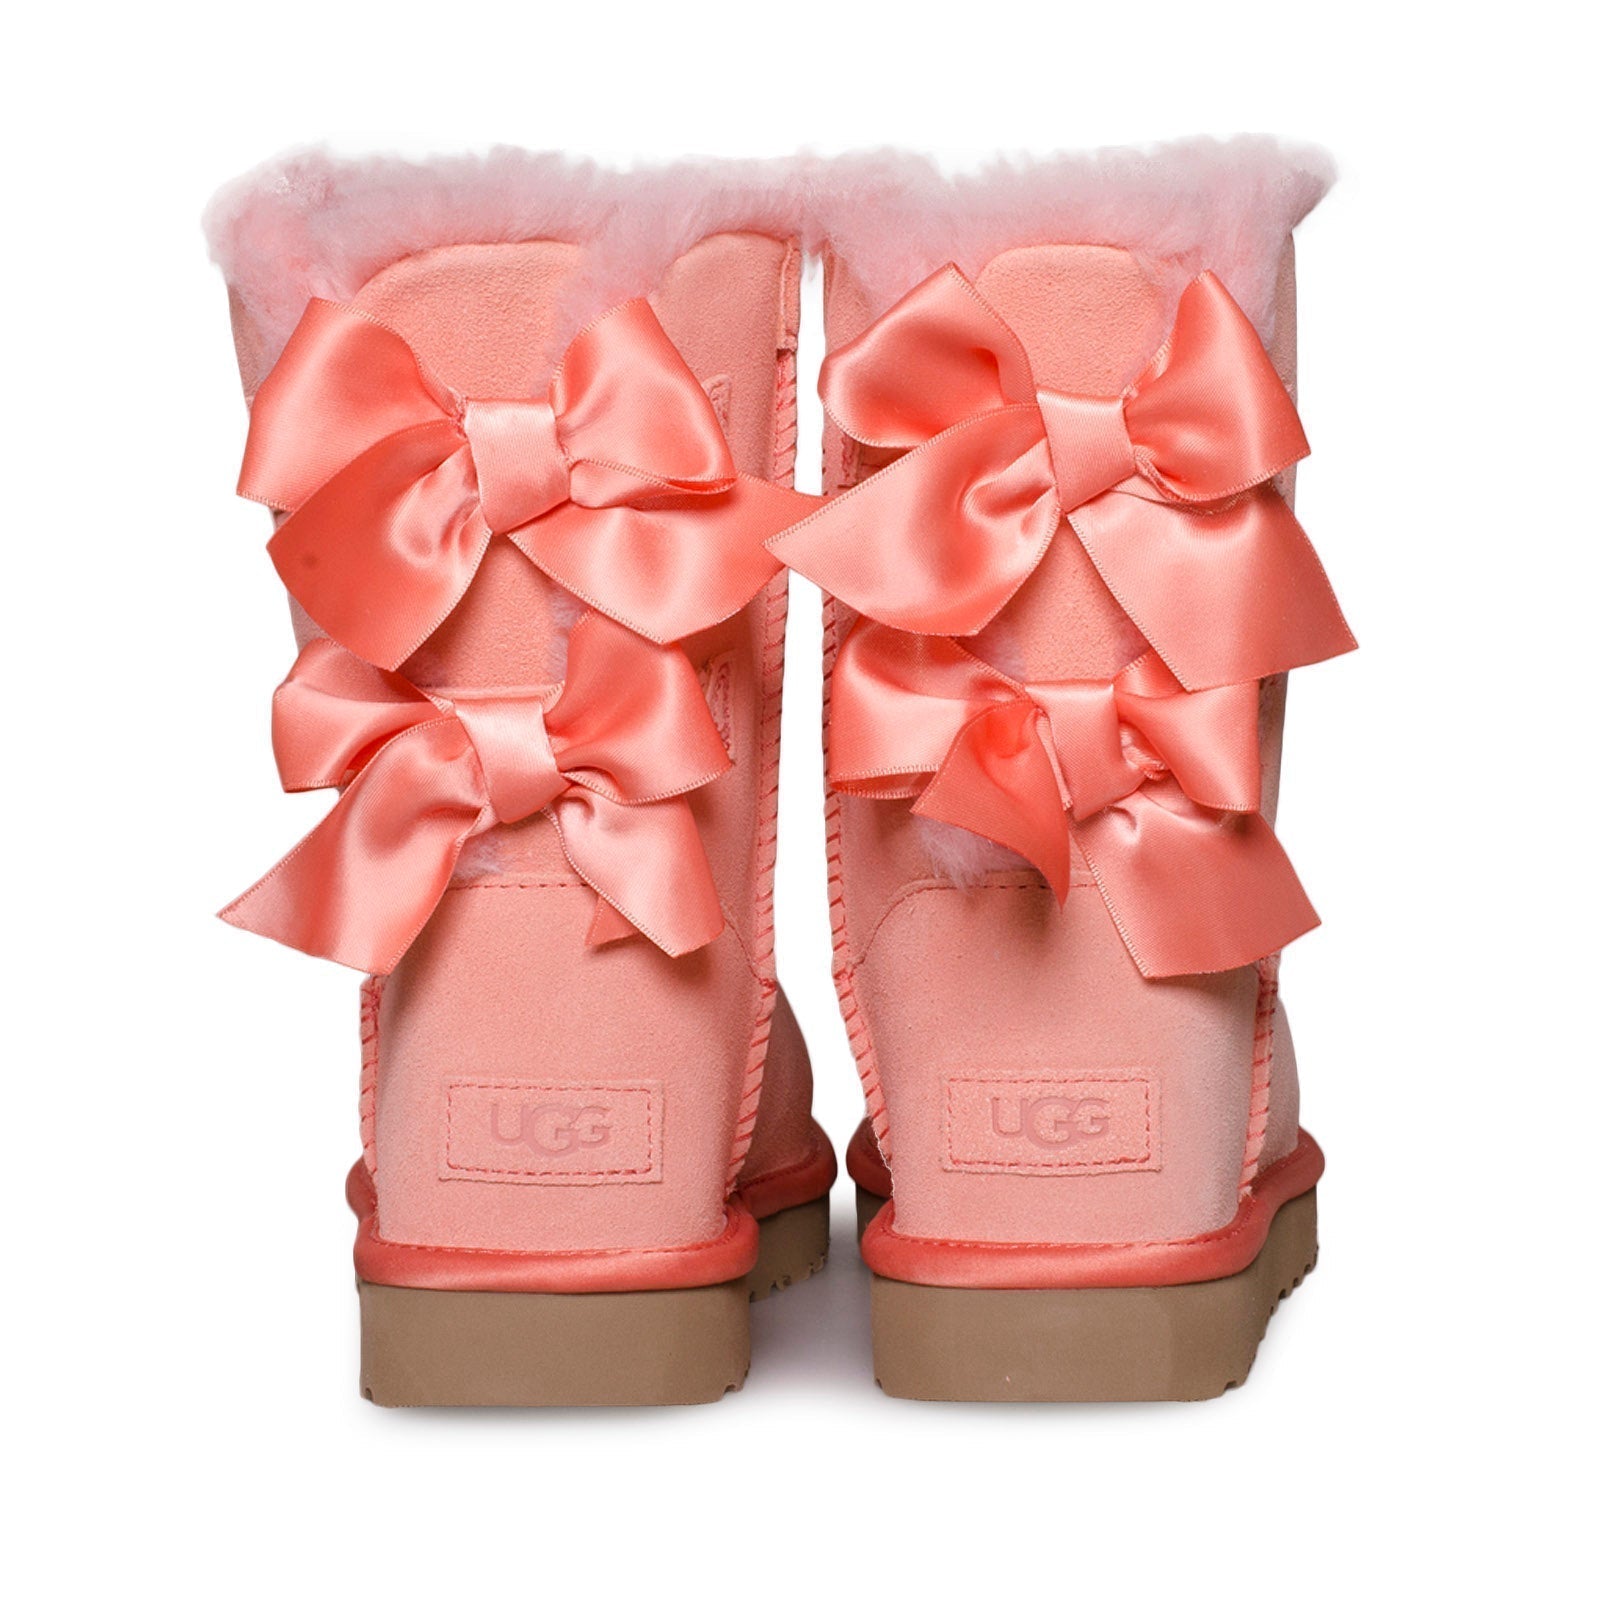 UGG Bailey Bow Satin Pink Boots - Women's